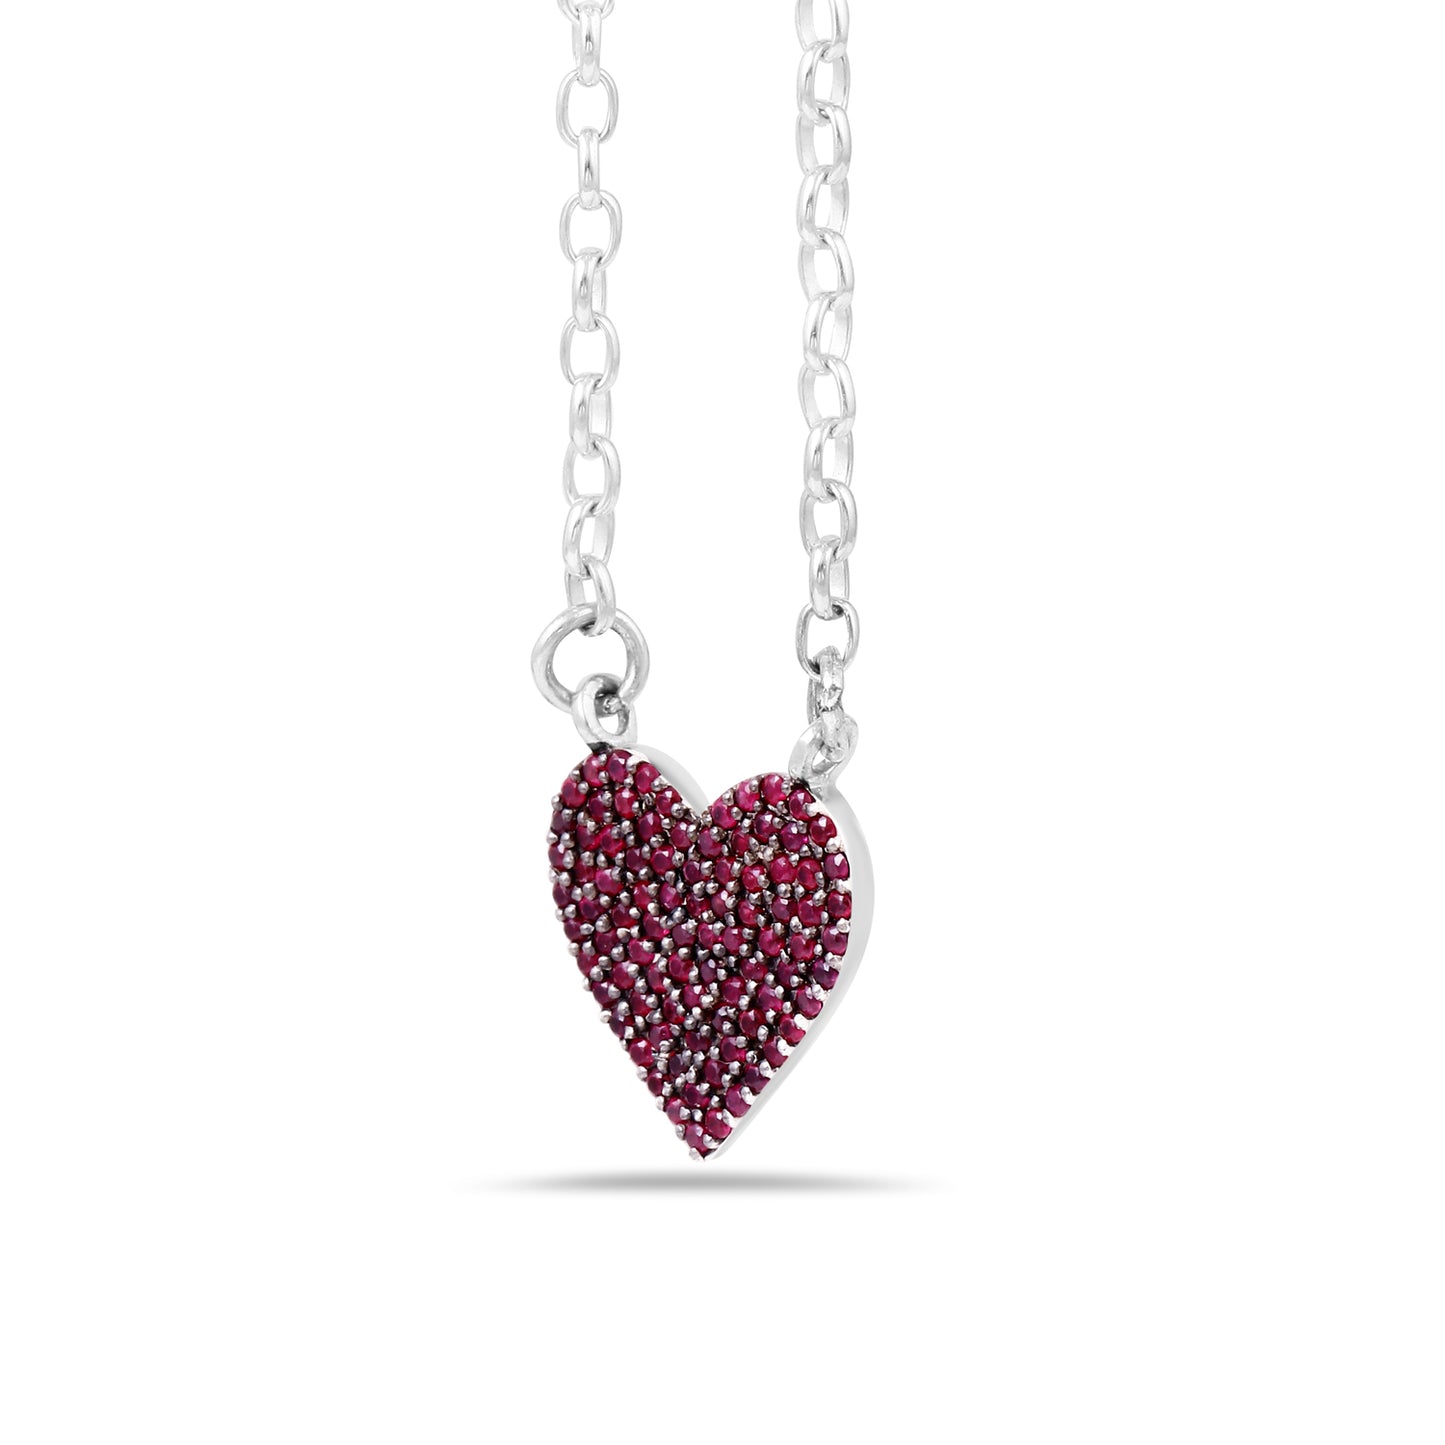 Ruby pave heart pendant